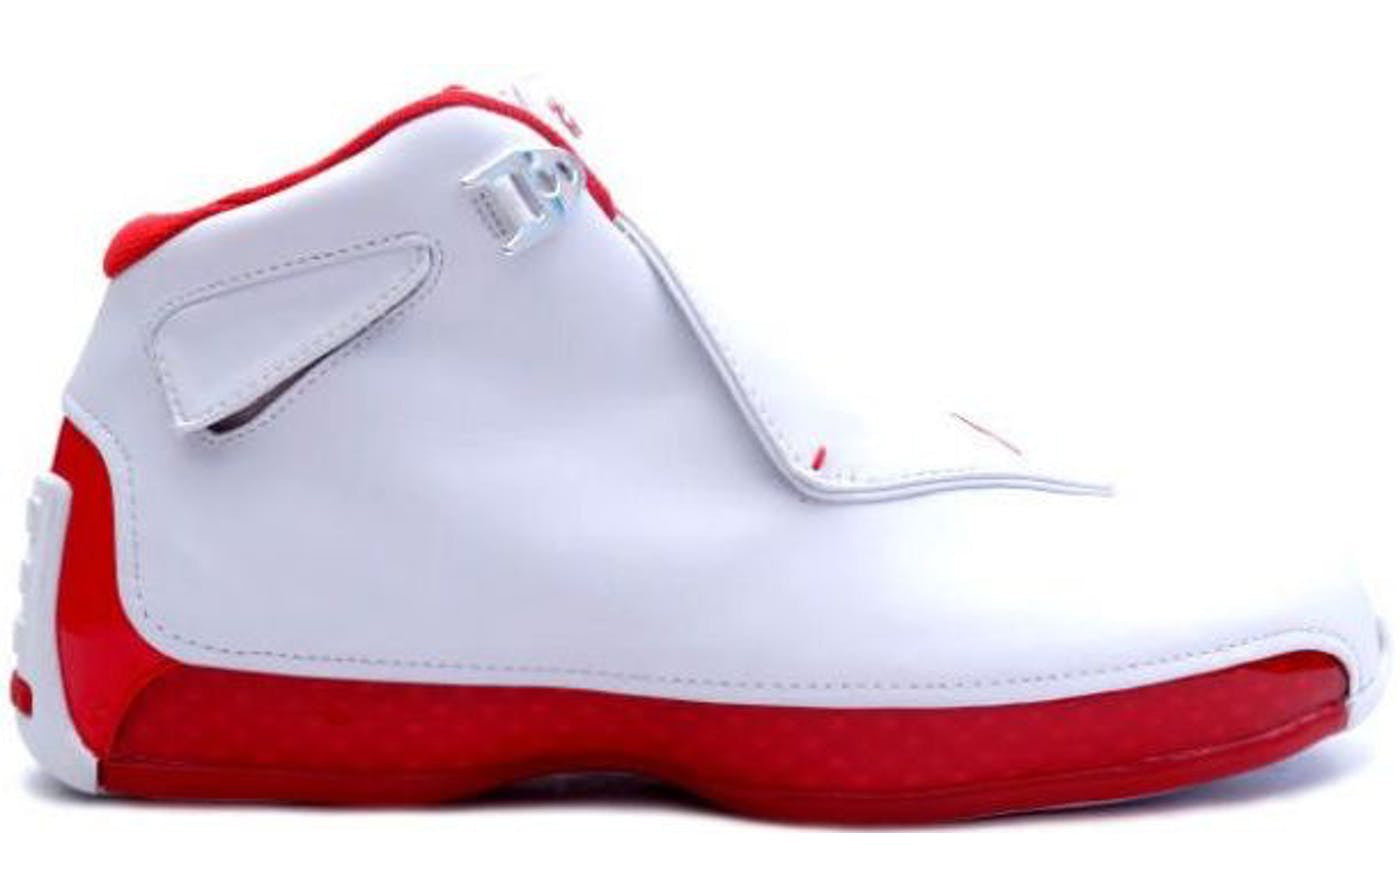 Air Jordan 18 OG 'White Varsity Red' 305869-161 Iconic Trainers - Click Image to Close